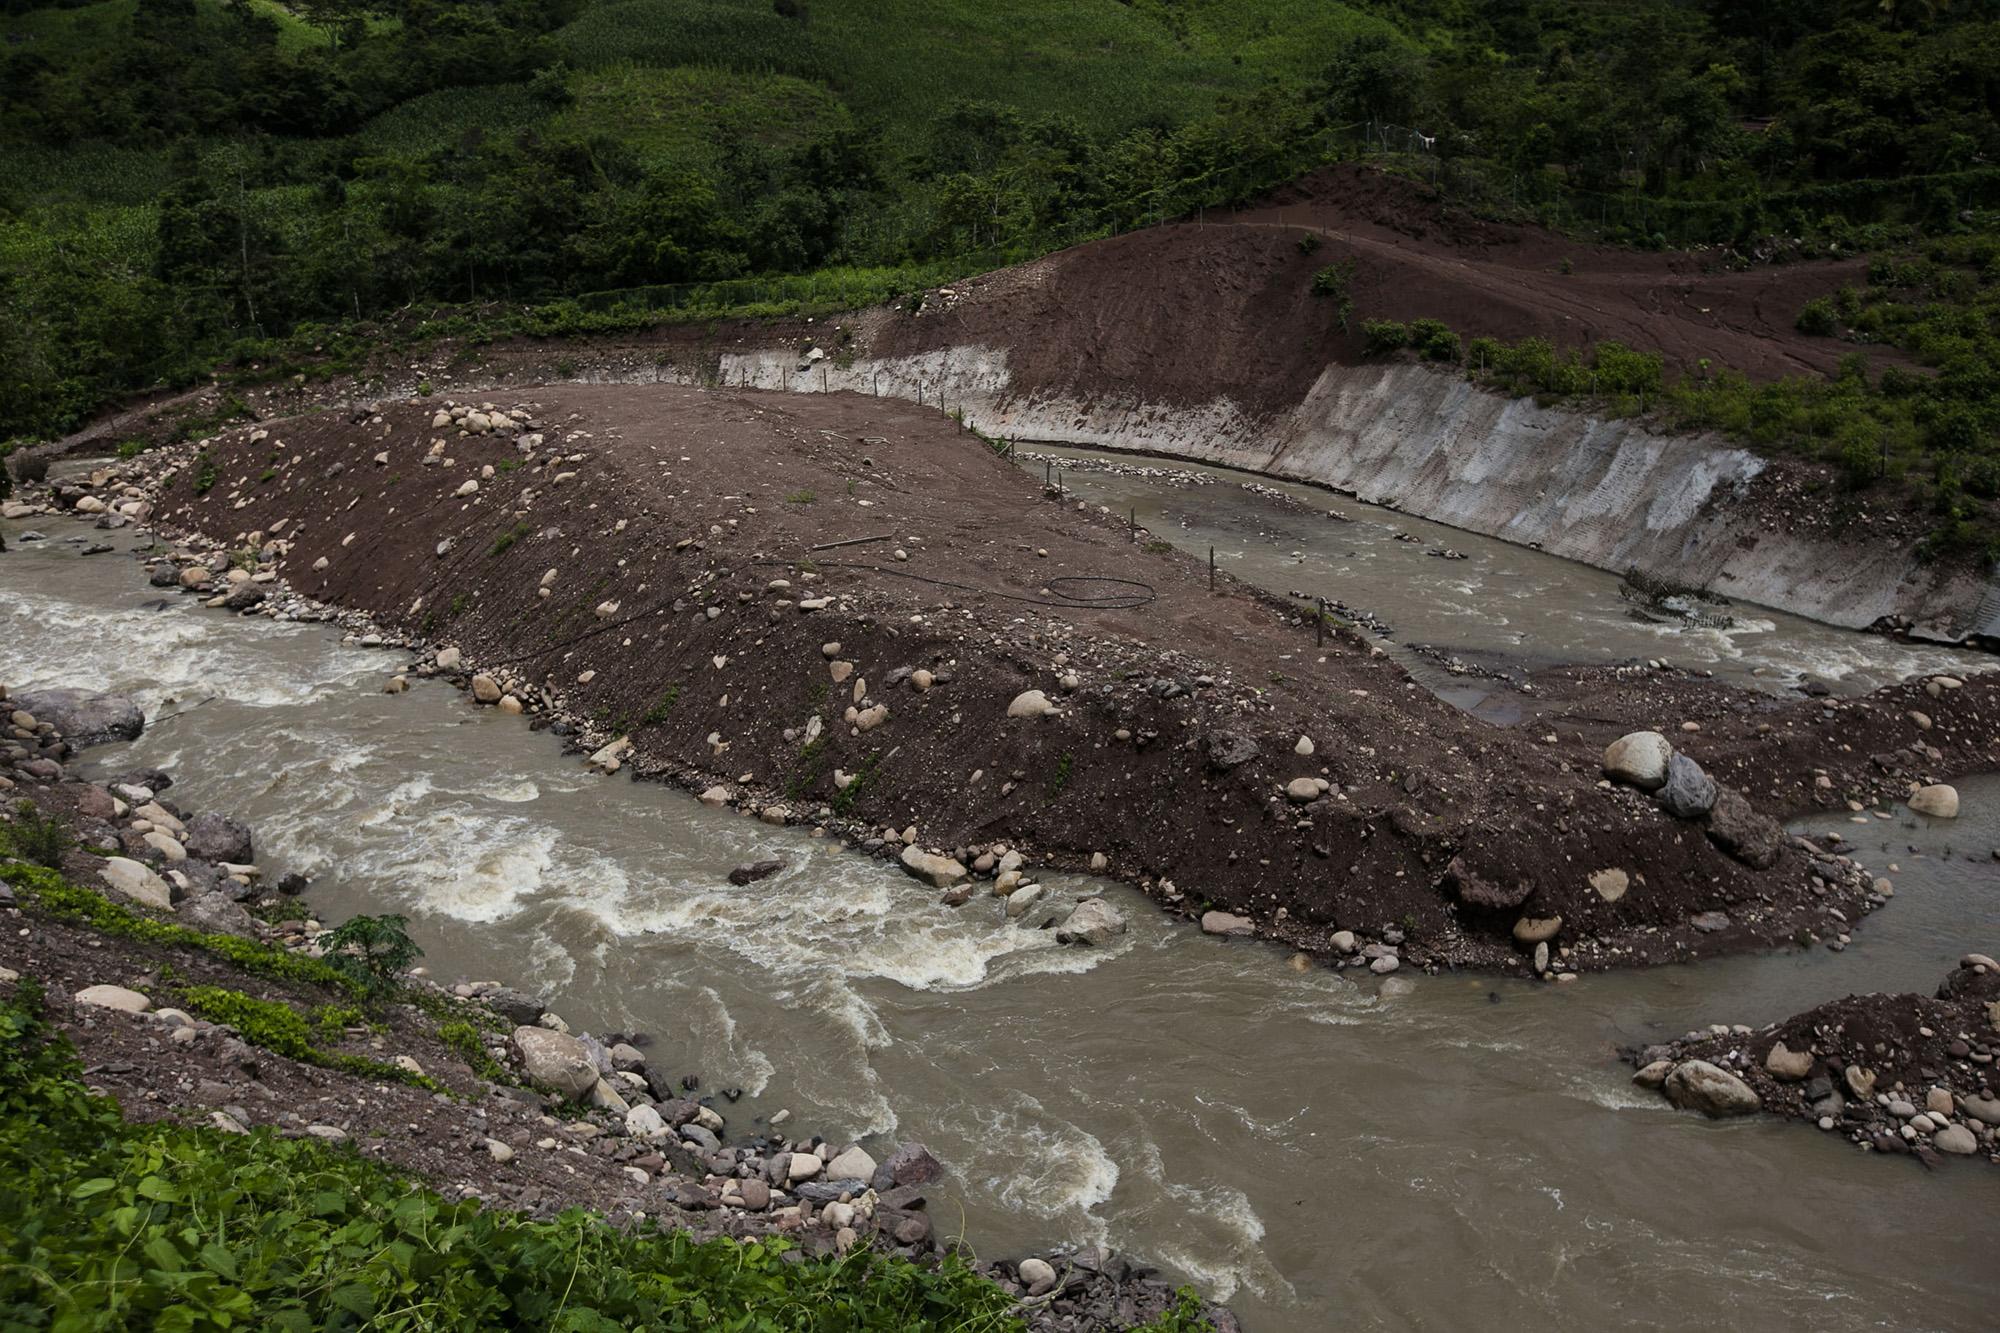 Construction of the Agua Zarca hydroelectric project, in the Gualcarque River in San Francisco de Ojuera, between the departments of Santa Bárbara and Intibucá. Here, the company plans to construct one of the three tunnels, which will transport some of the water to the power plant.